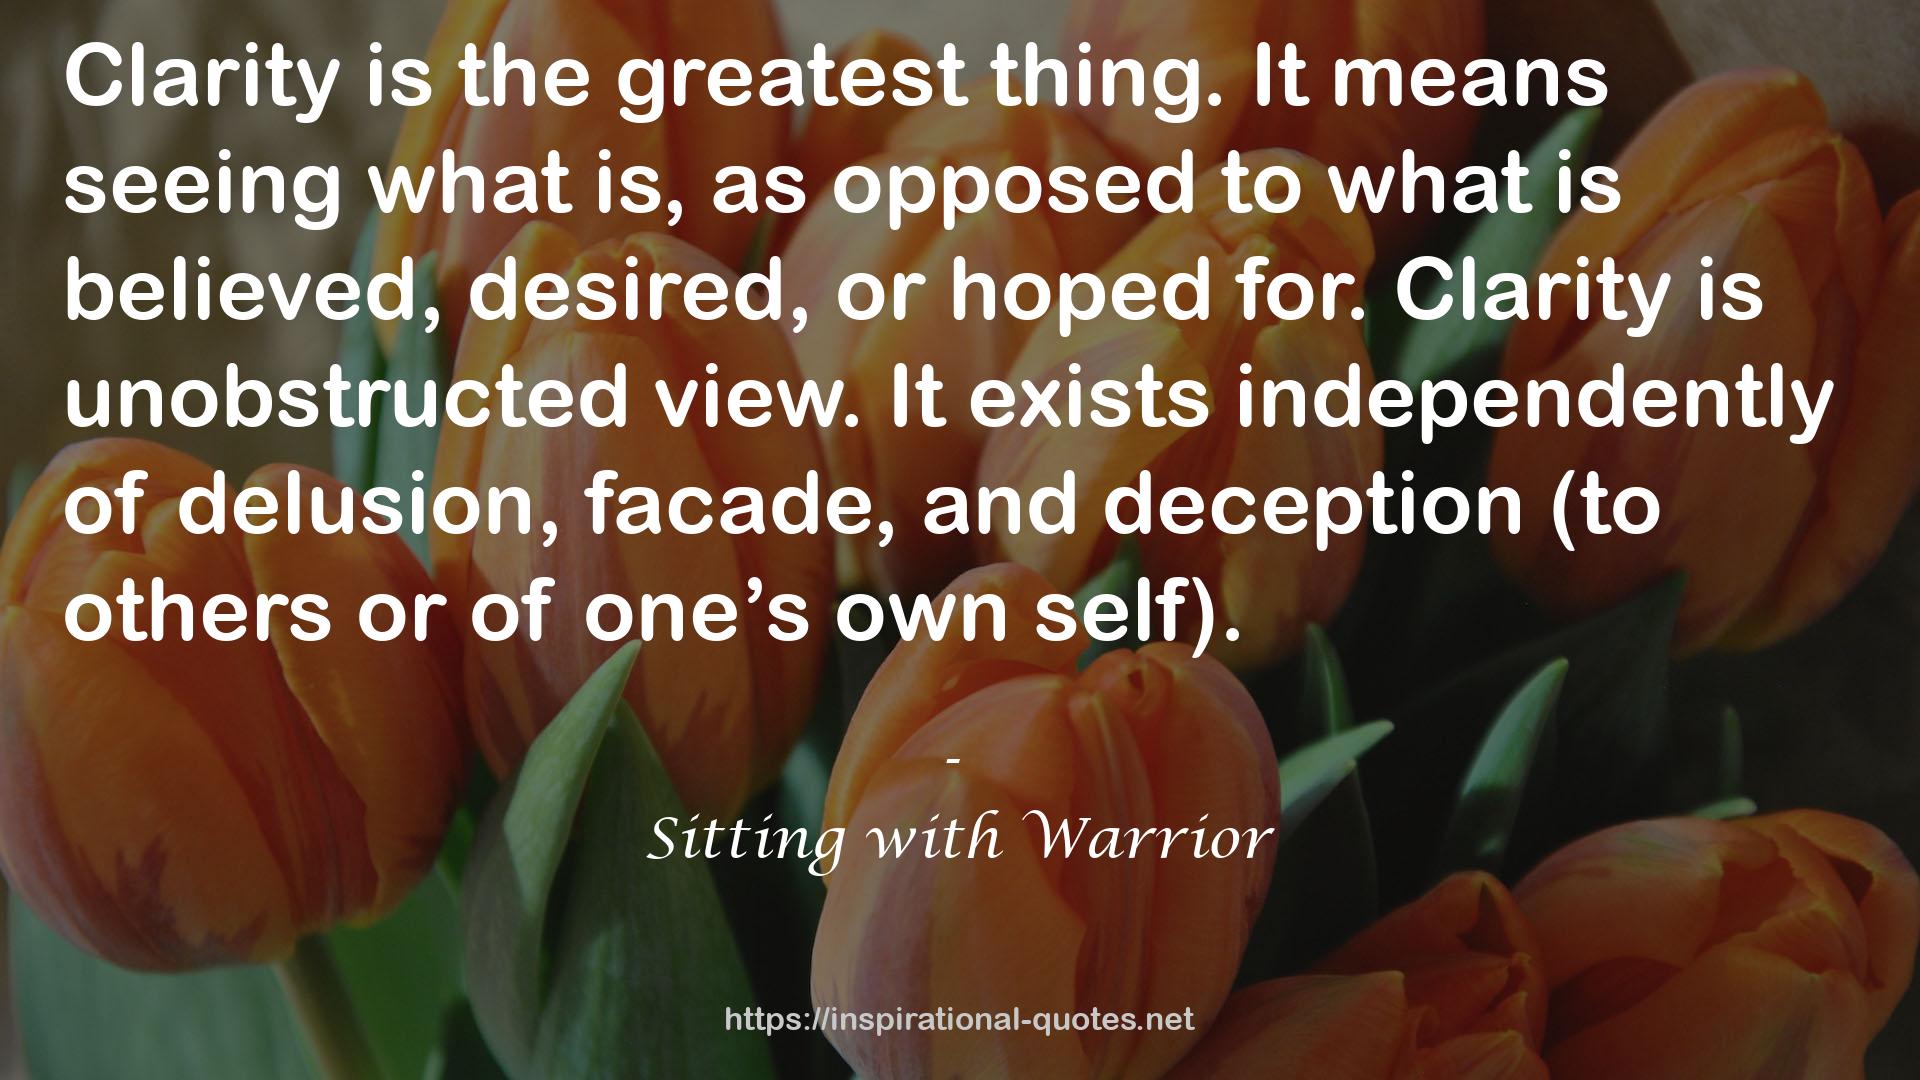 Sitting with Warrior QUOTES